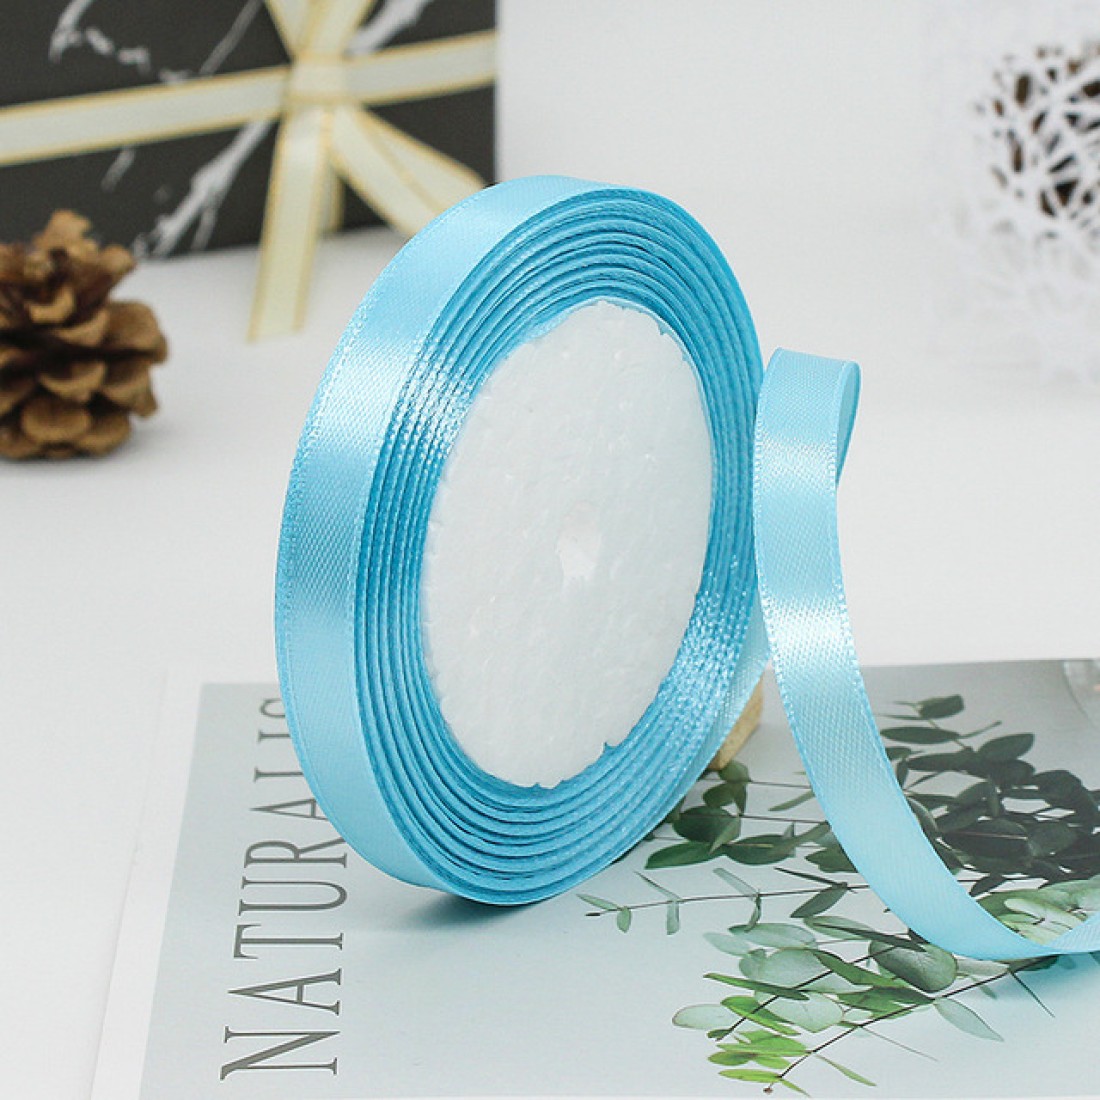 Craftyscrappers Satin Ribbons - SKY BLUE